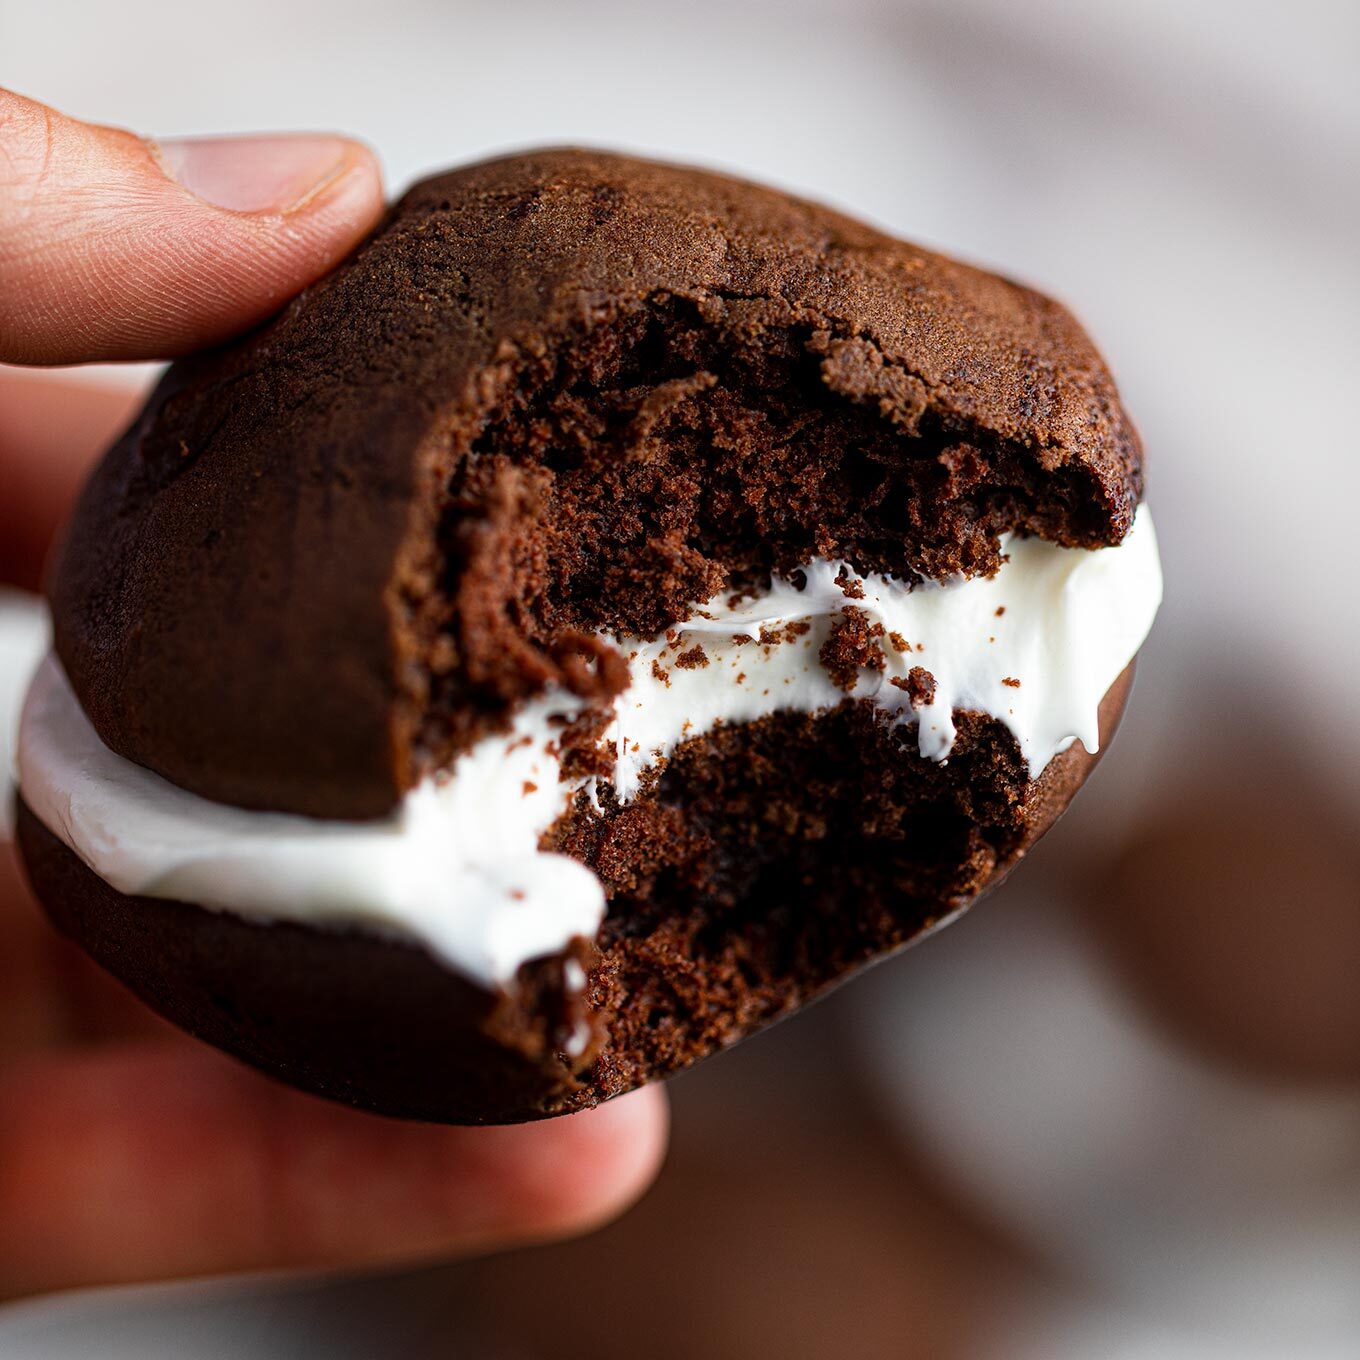 Chocolate Whoopie Pie with bite taken out